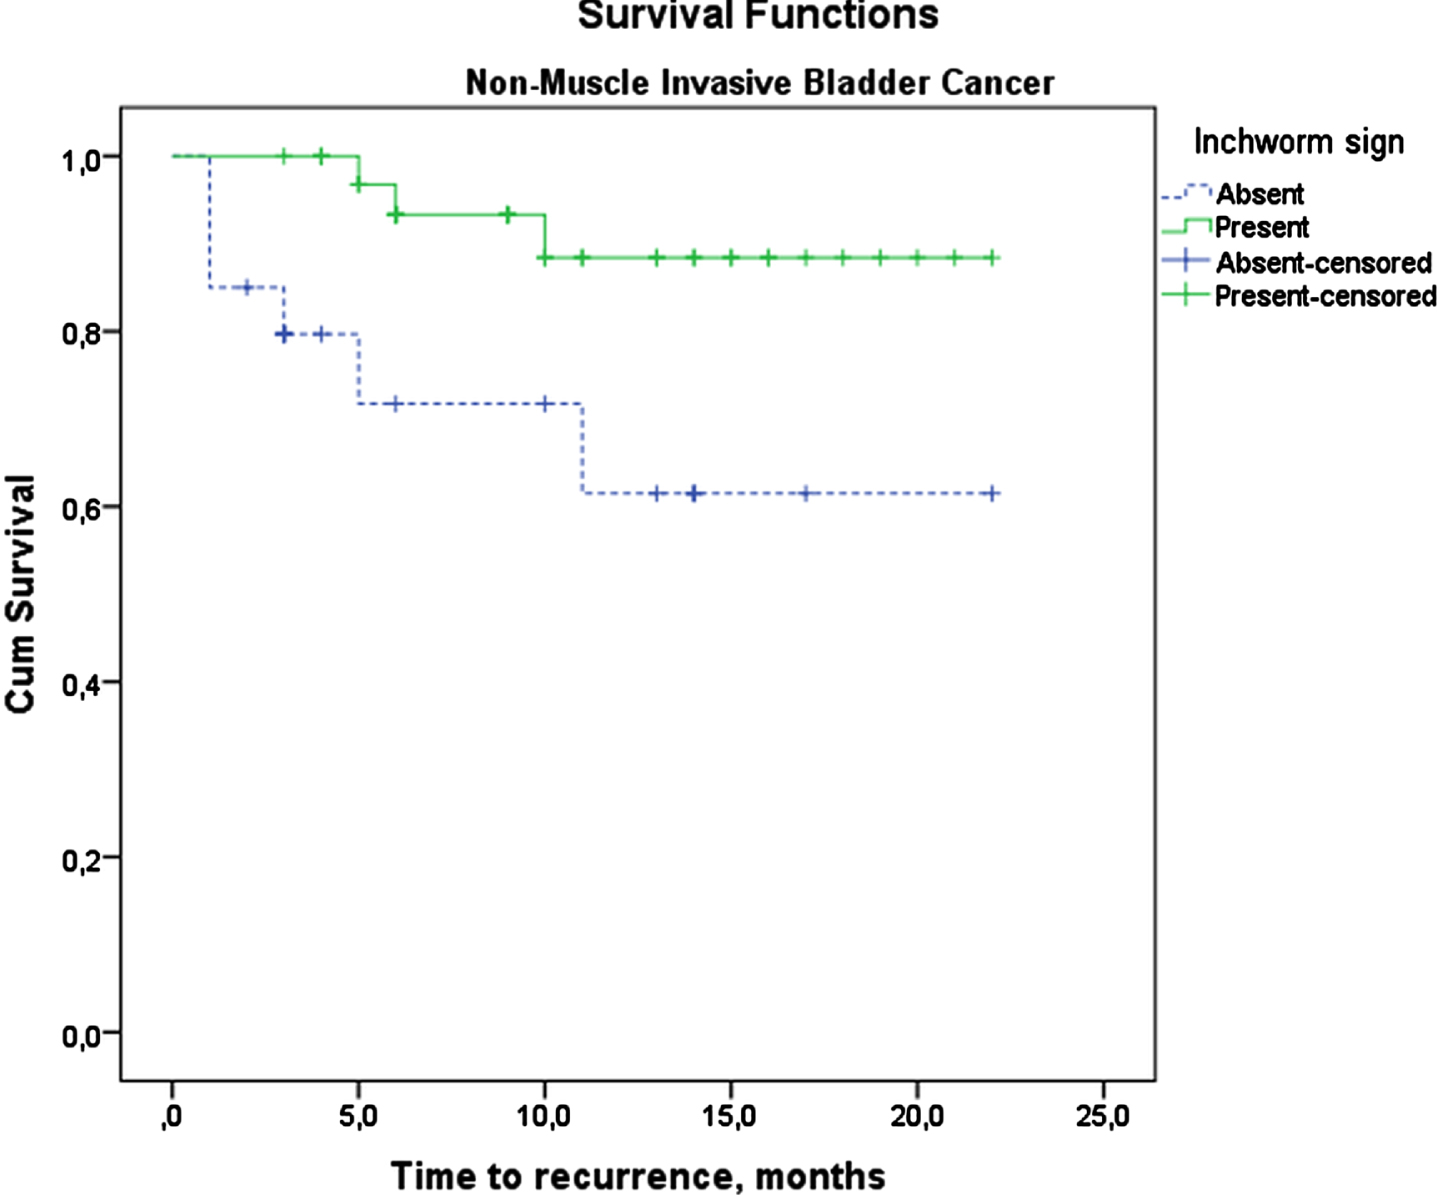 Recurrence-free Kaplan-Meier Survival Analysis of Non-Muscle Invasive Bladder Cancer patients.